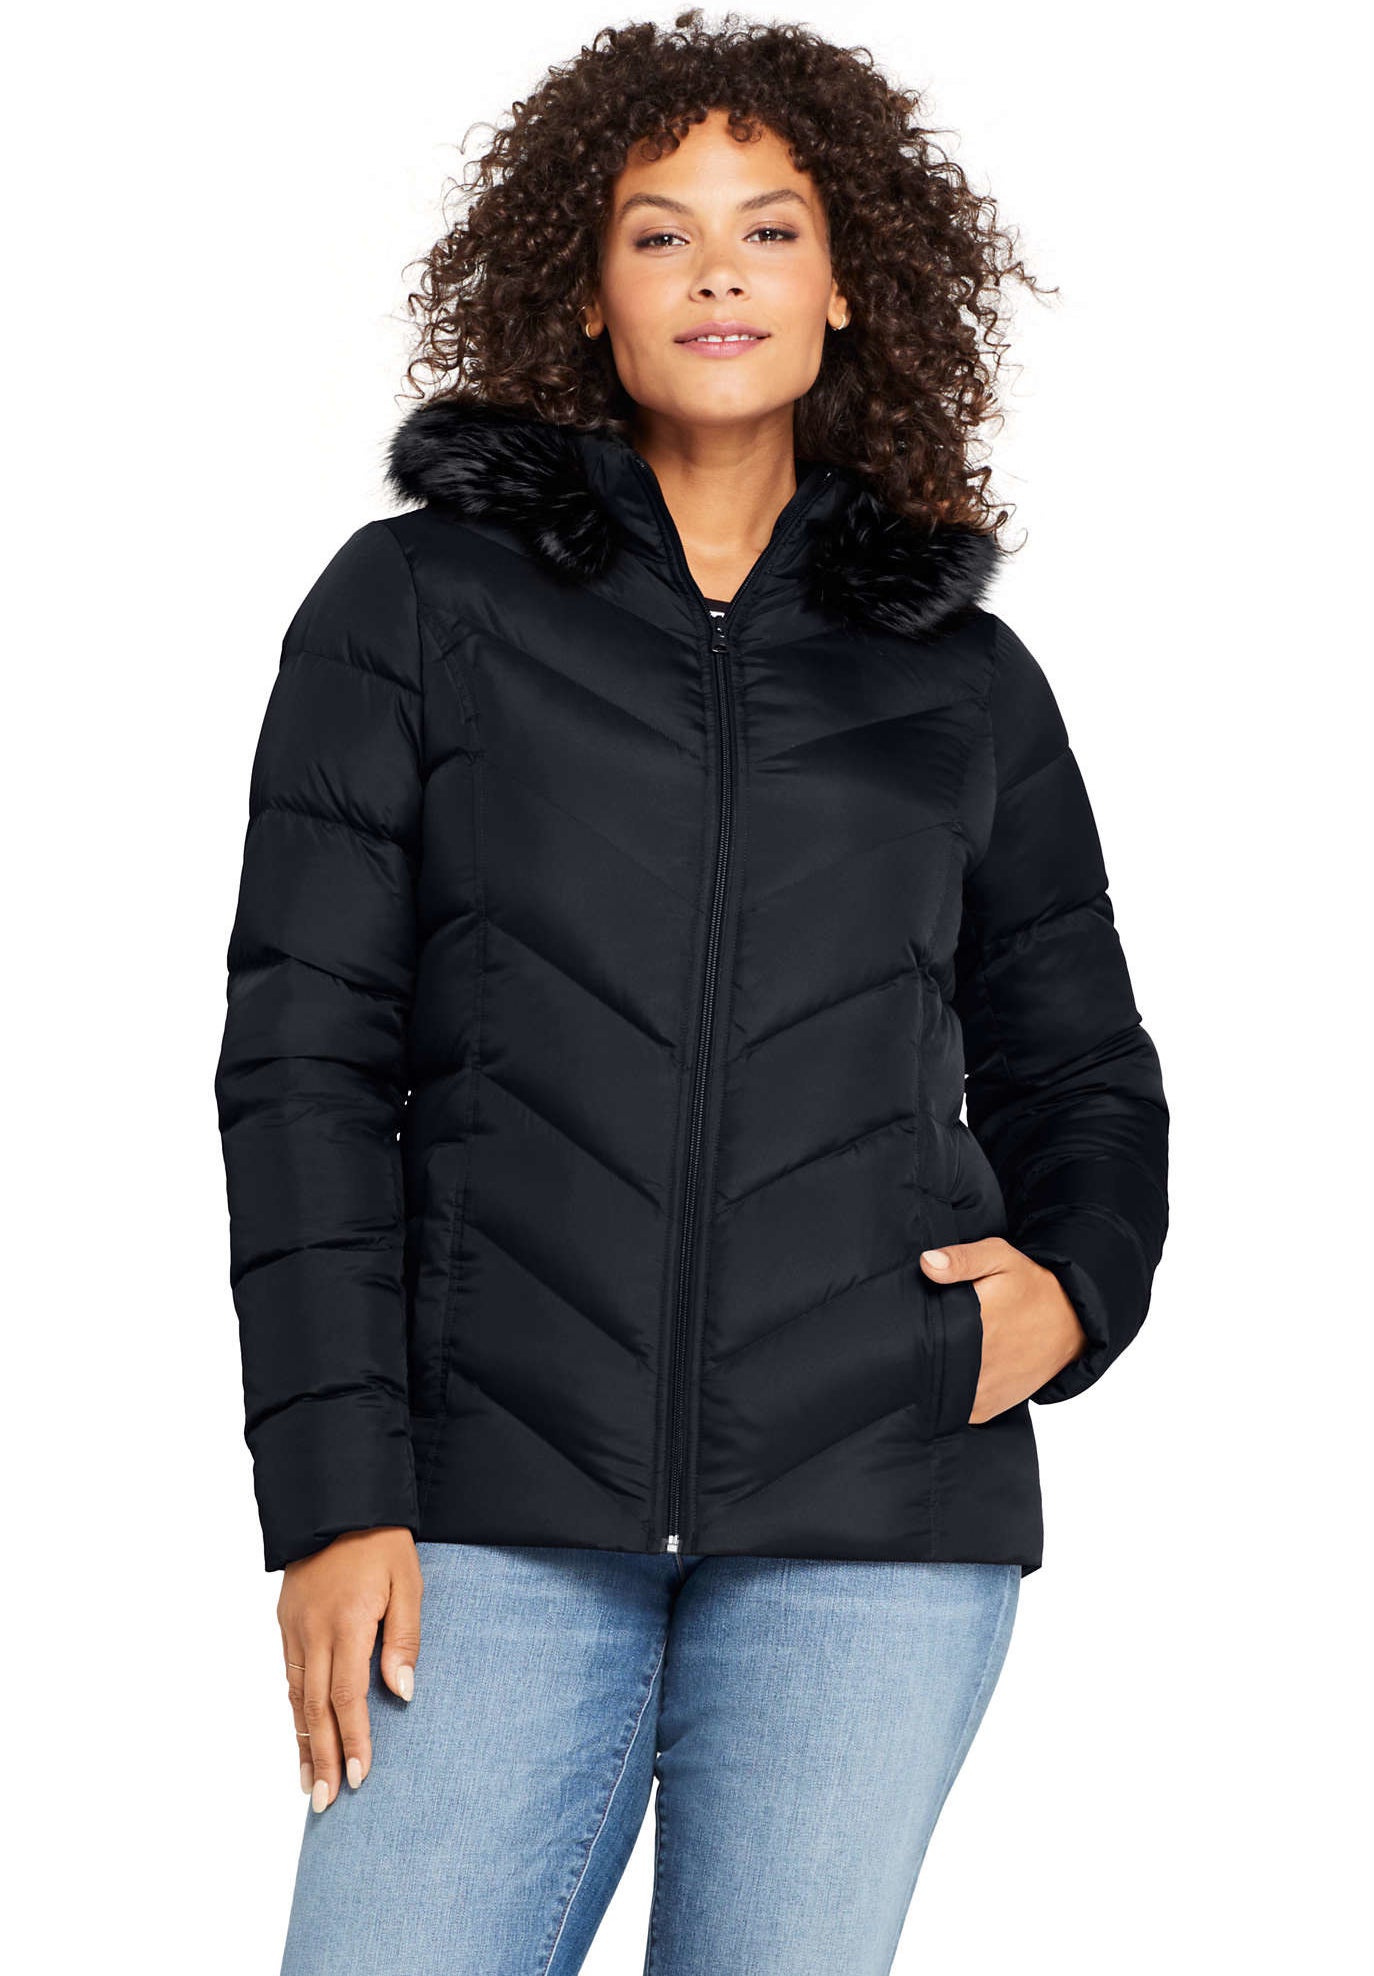 31 Jackets From Walmart That'll Help Keep You Warm When It's Cold Out